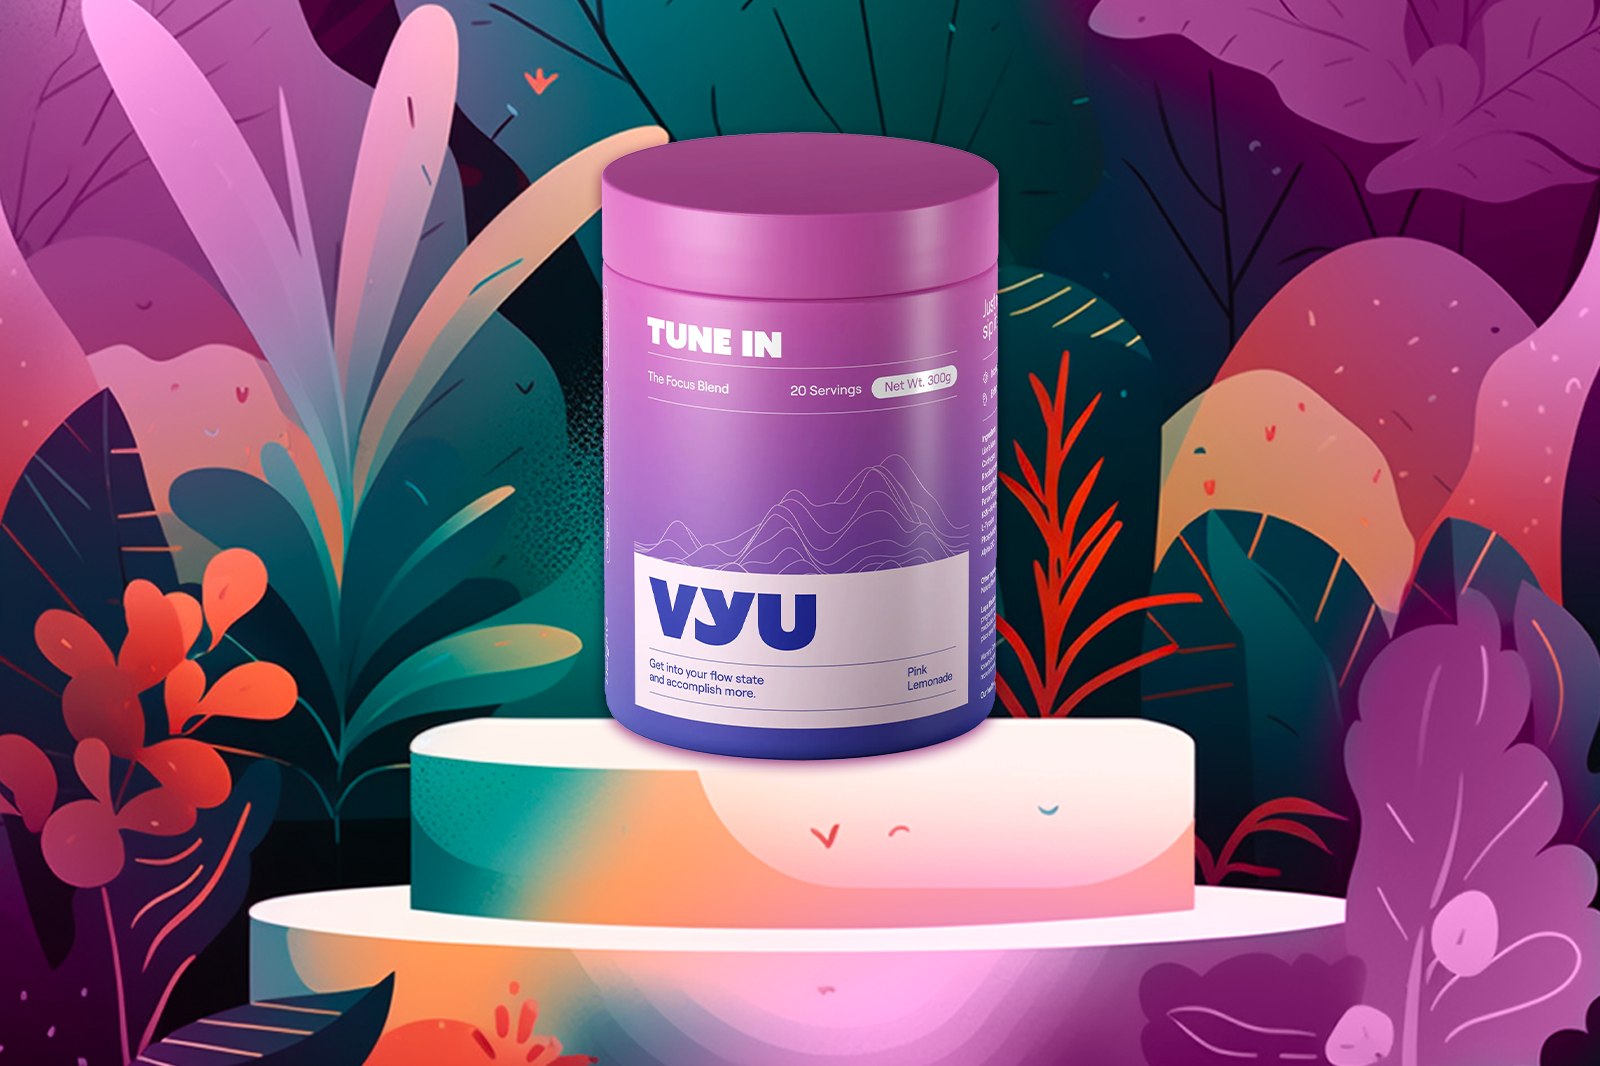 A container of VYU TUNE IN with Pink Lemonade flavor is placed against a forest backdrop